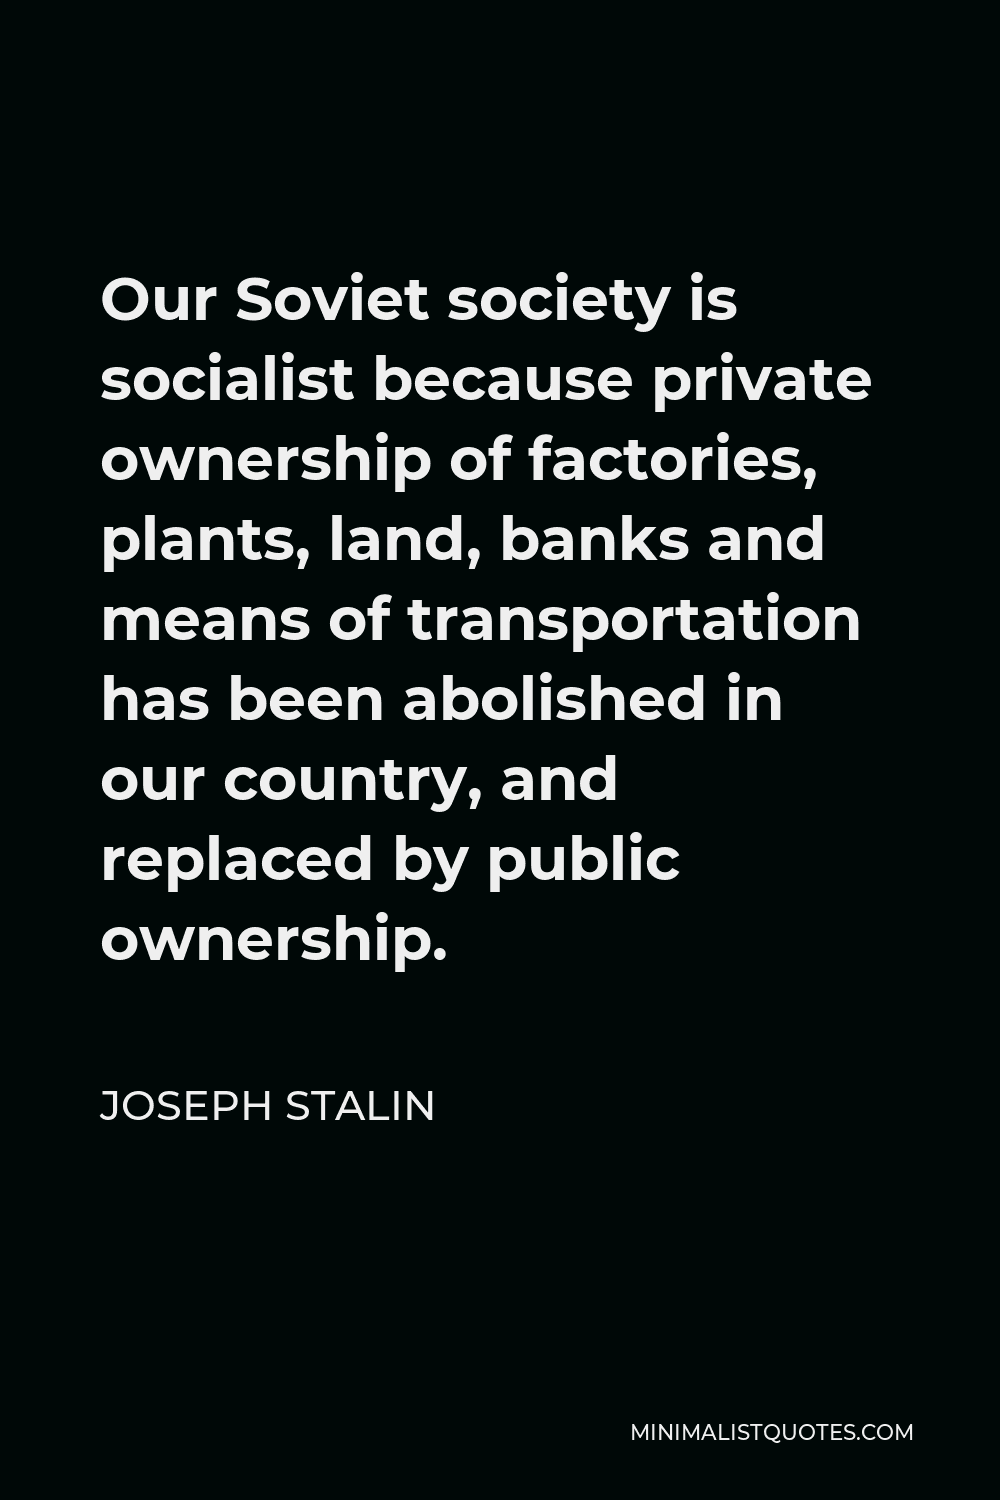 Joseph Stalin Quote - Our Soviet society is socialist because private ownership of factories, plants, land, banks and means of transportation has been abolished in our country, and replaced by public ownership.